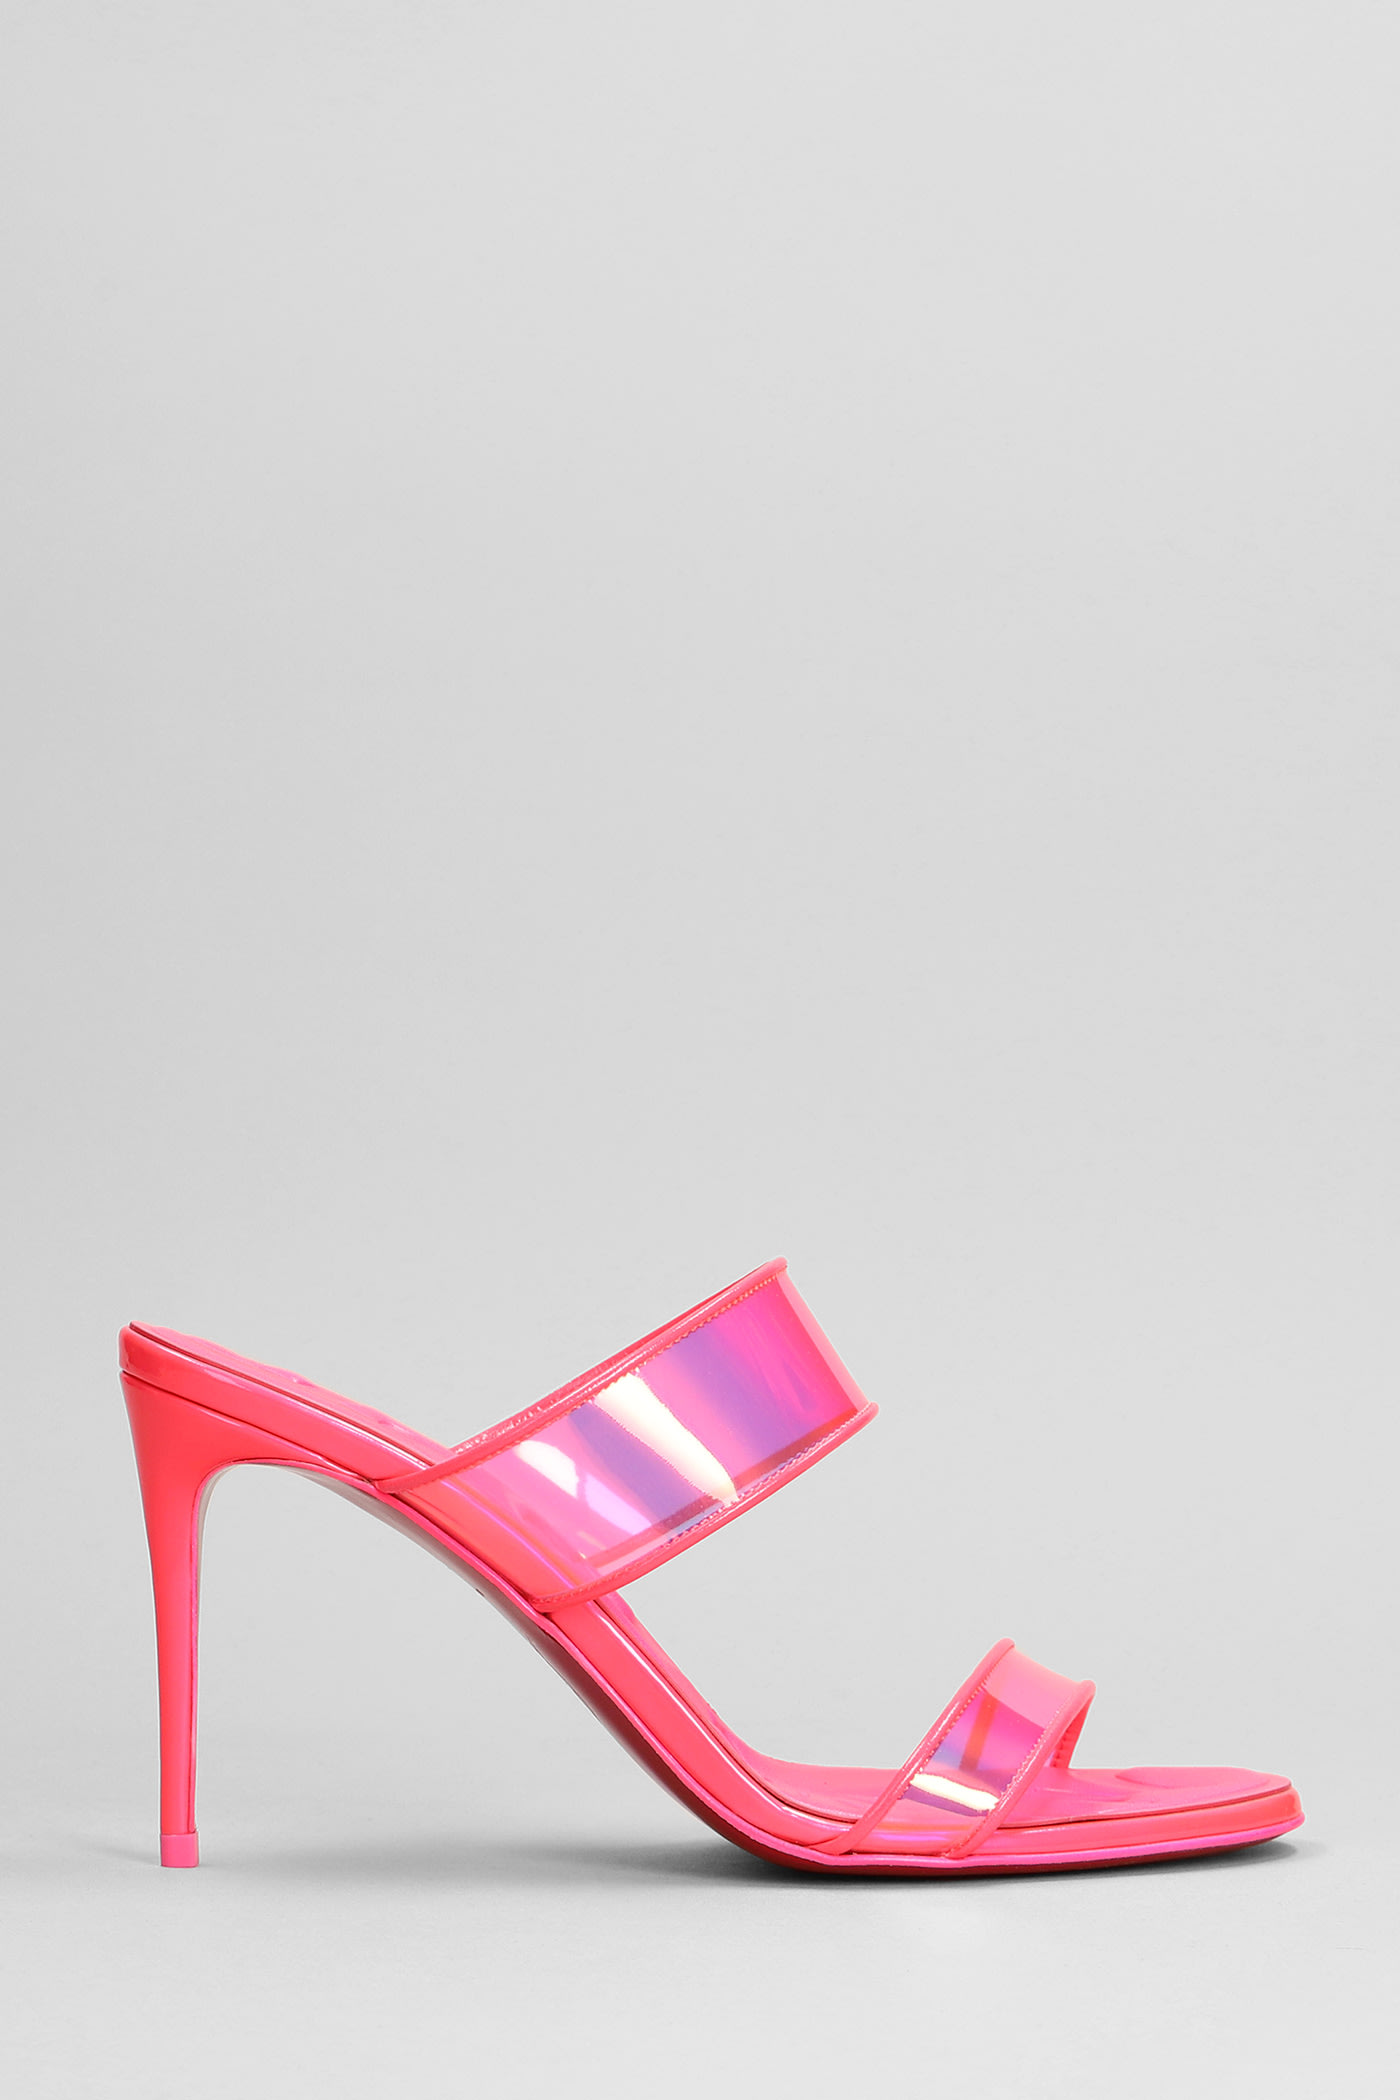 CHRISTIAN LOUBOUTIN JUST LOUBI SANDALS IN FUXIA RUBBER/PLASIC